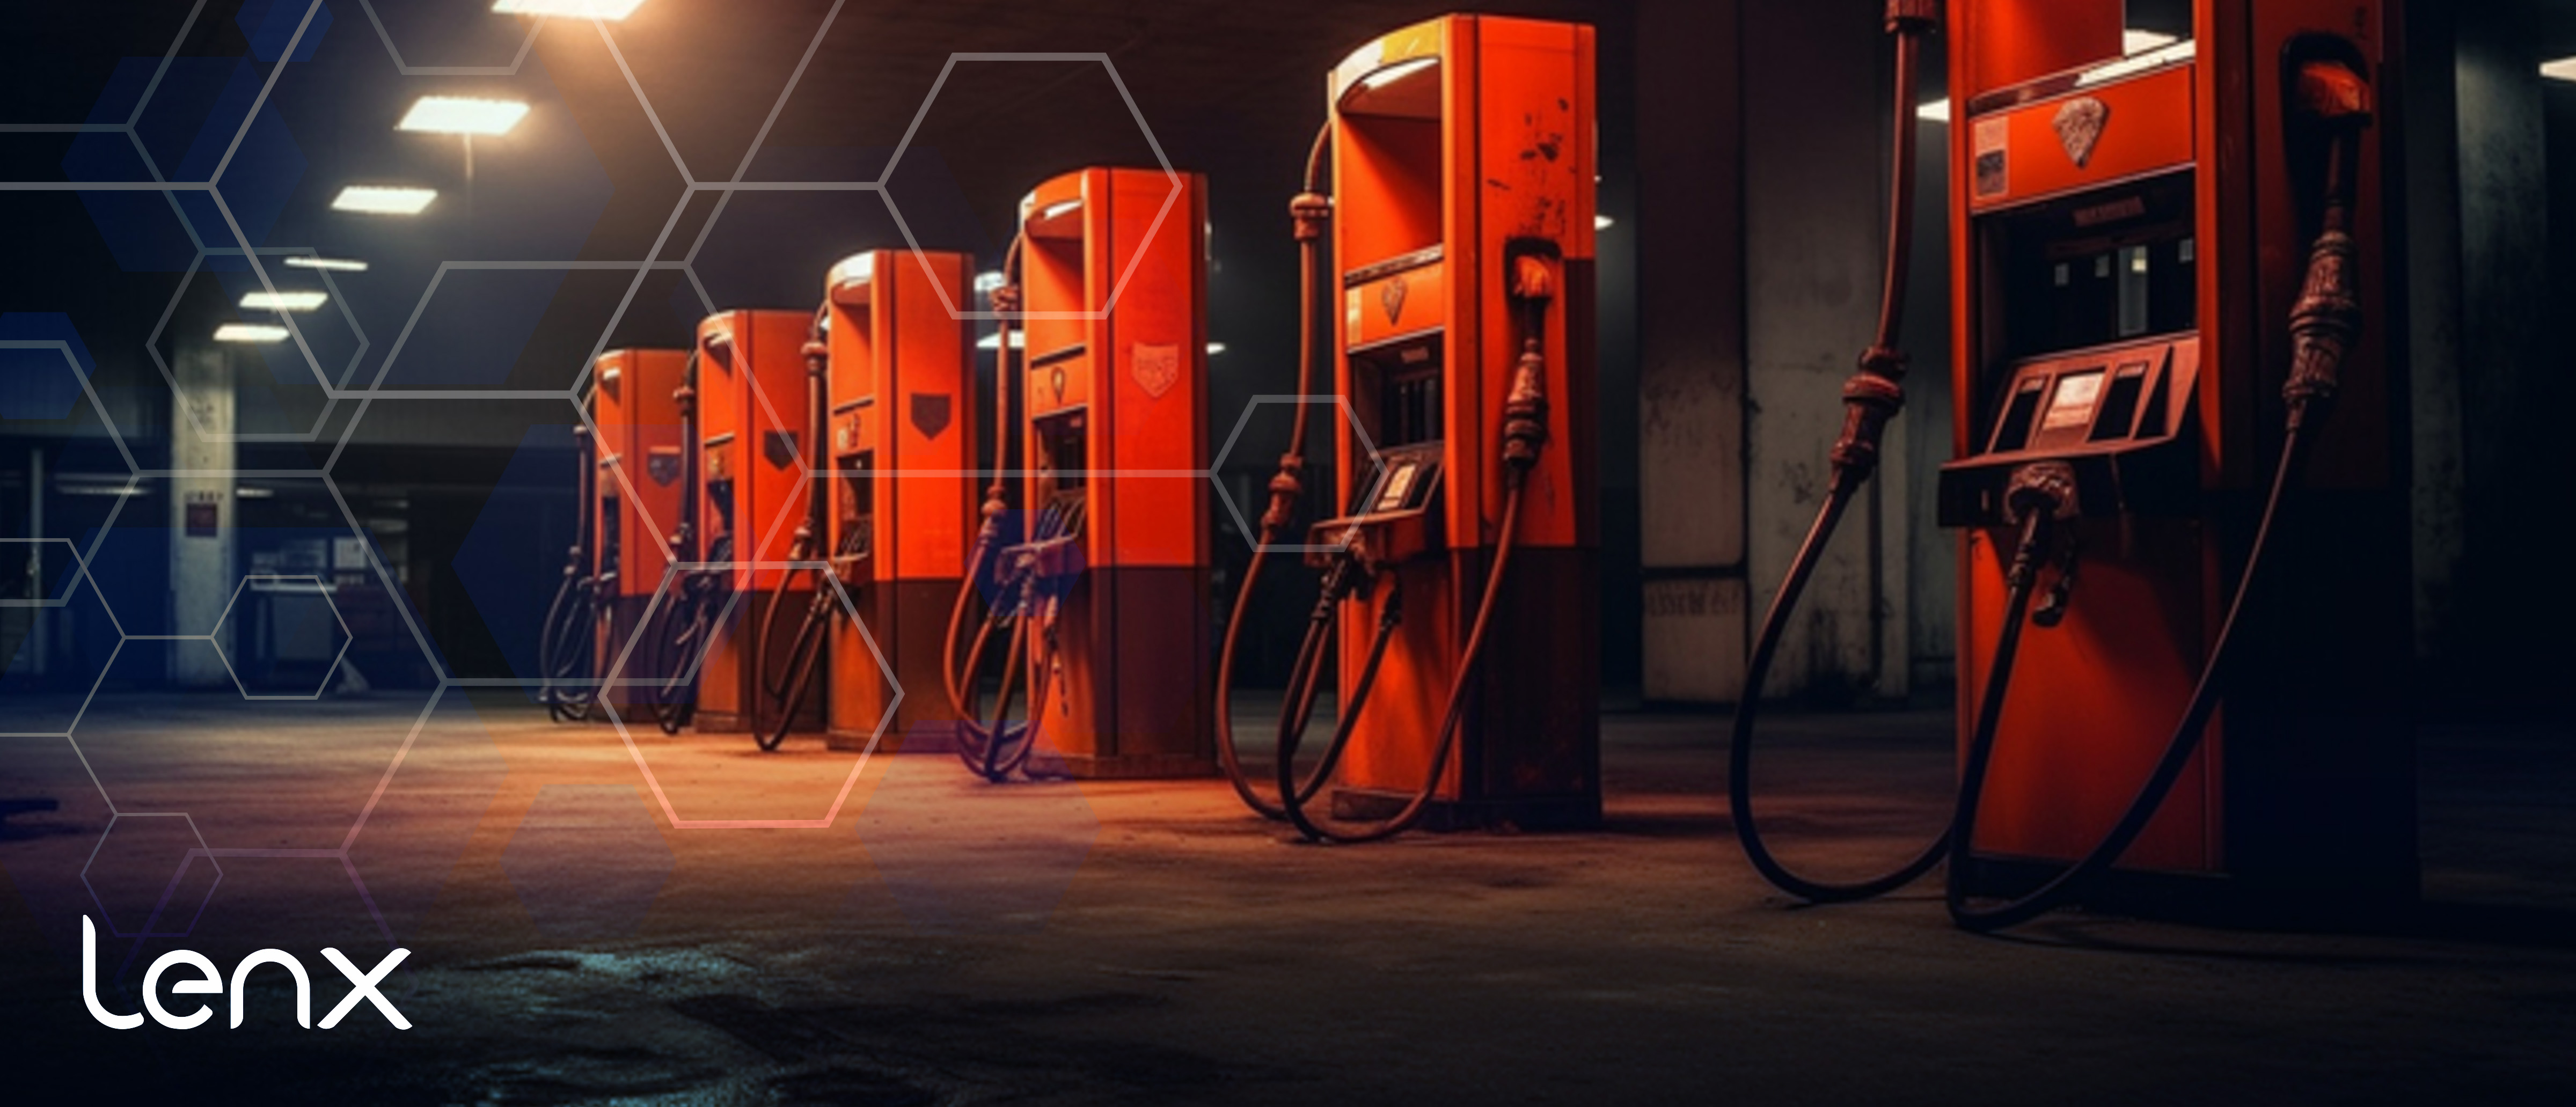 AI Security and Active Shooter Detection's Role In Helping Dissuade Gas Station Crimes